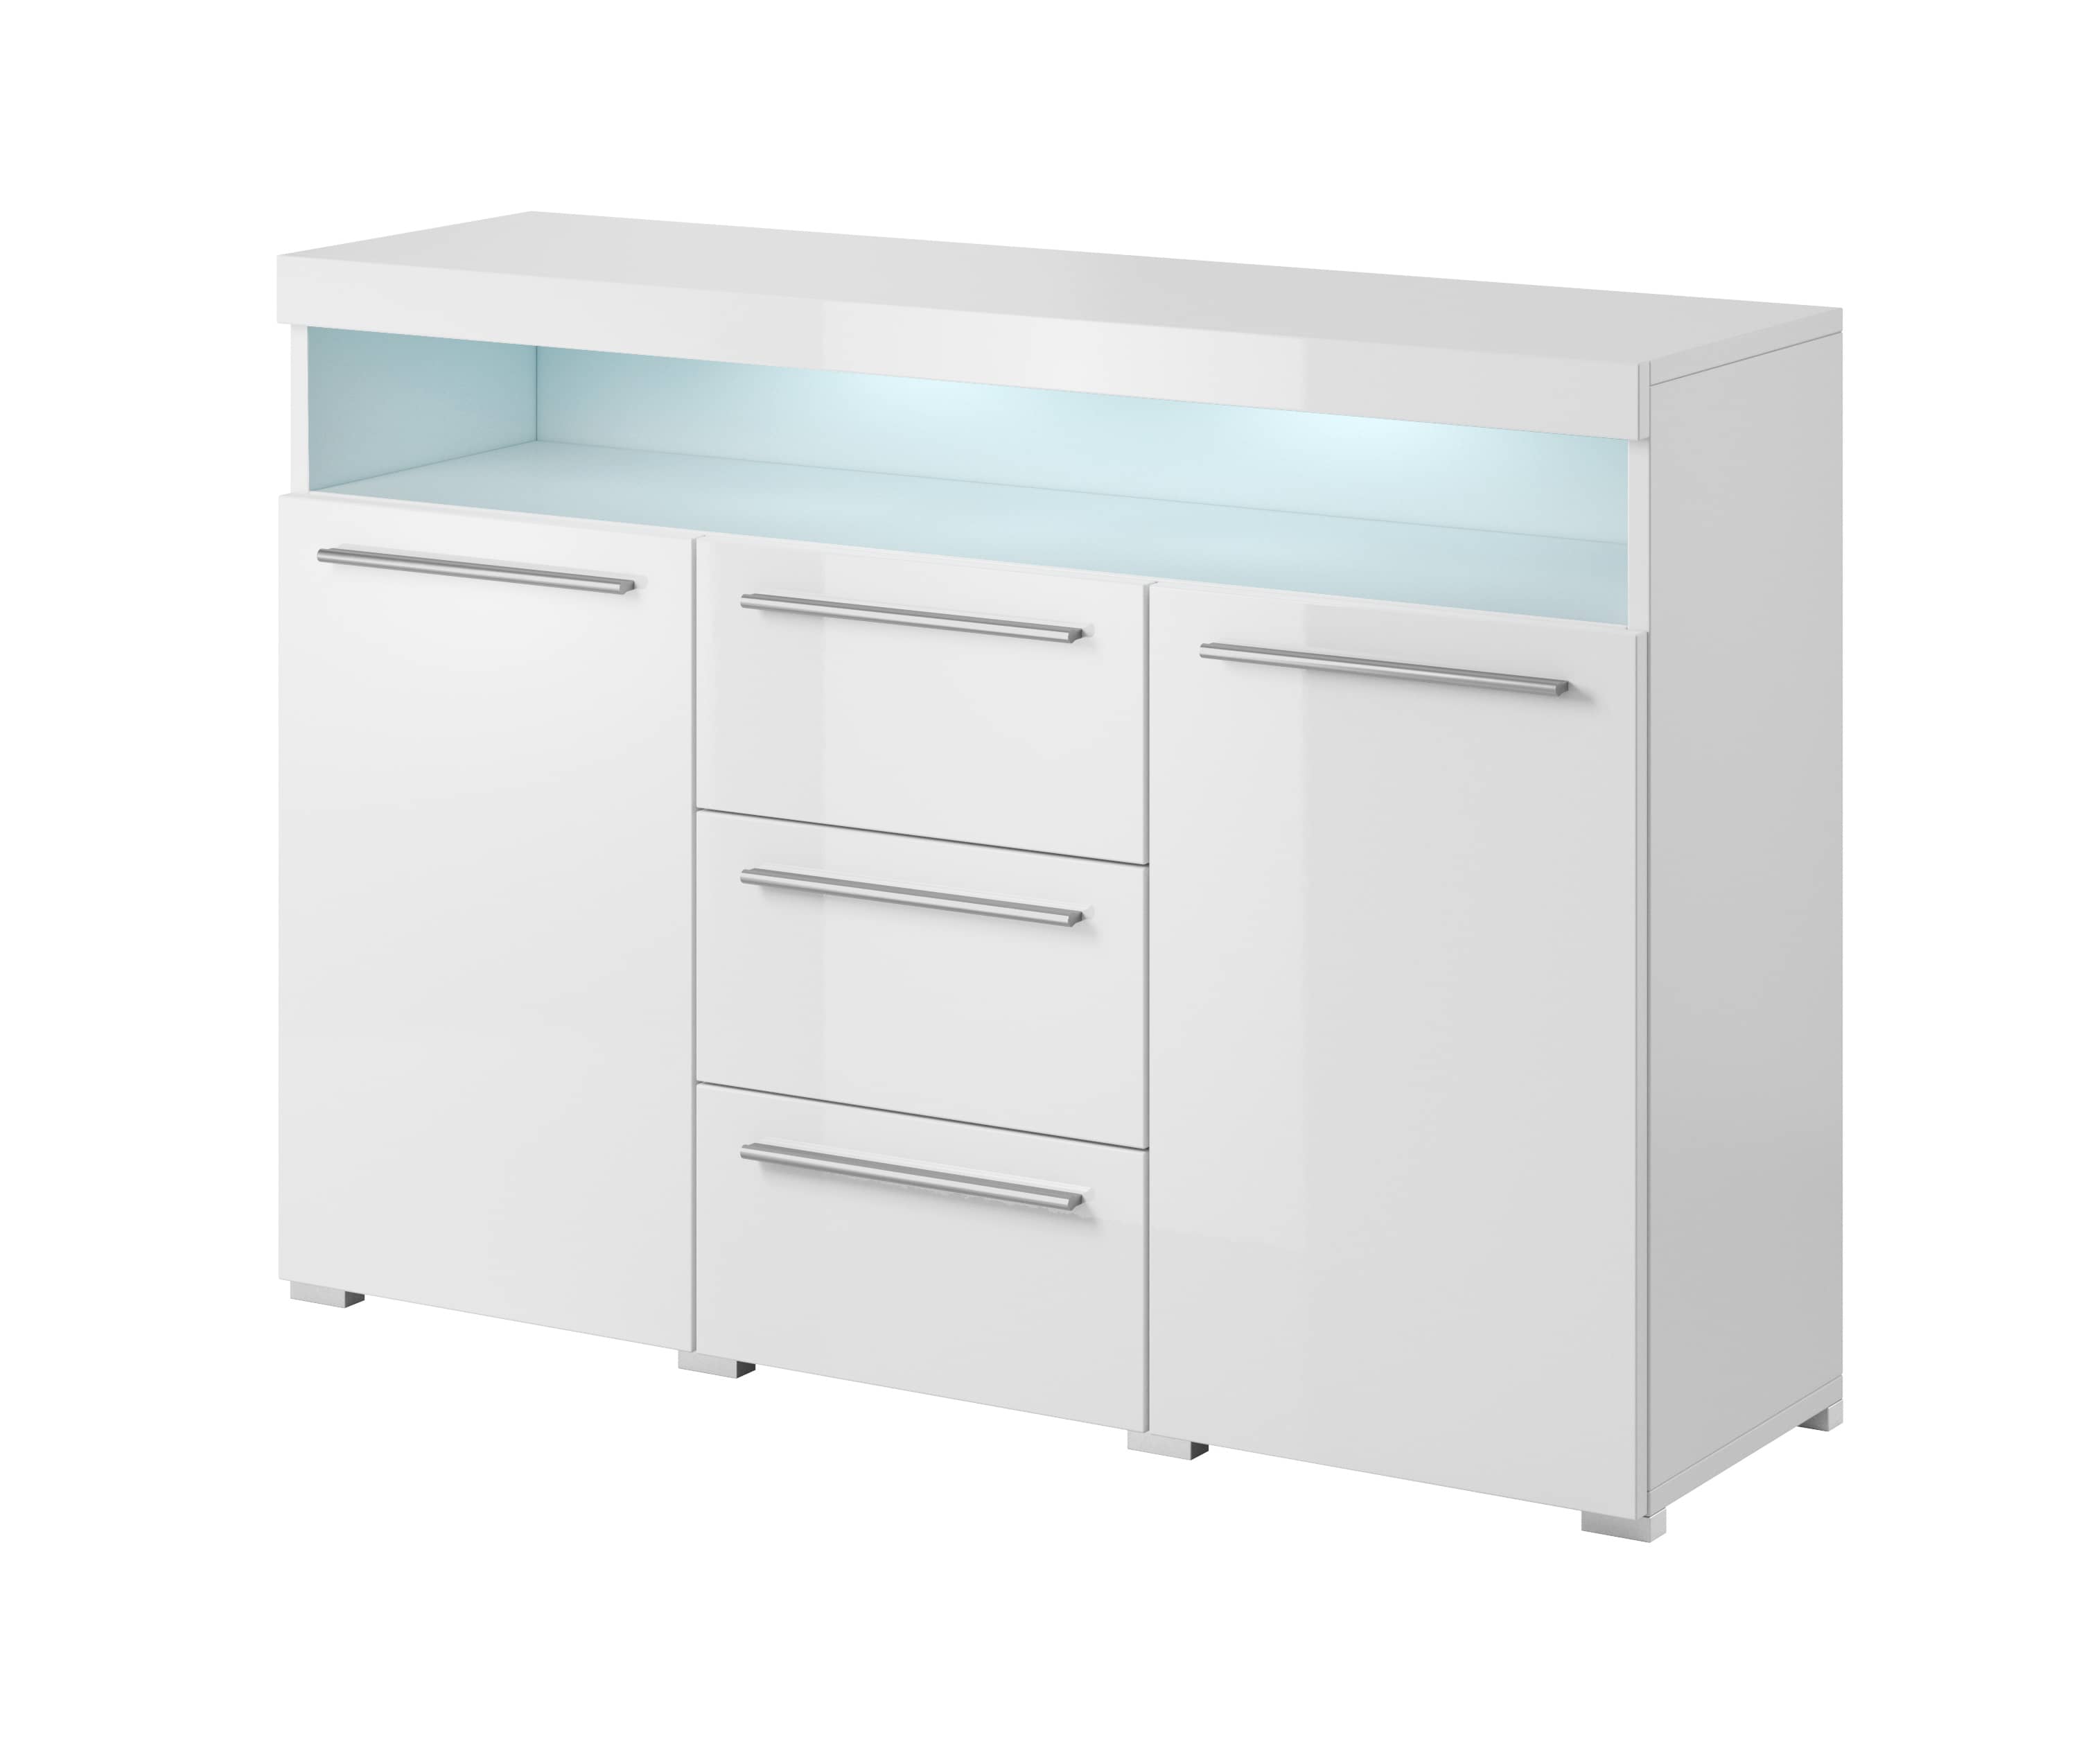 View India 26 Sideboard Cabinet 132cm White information